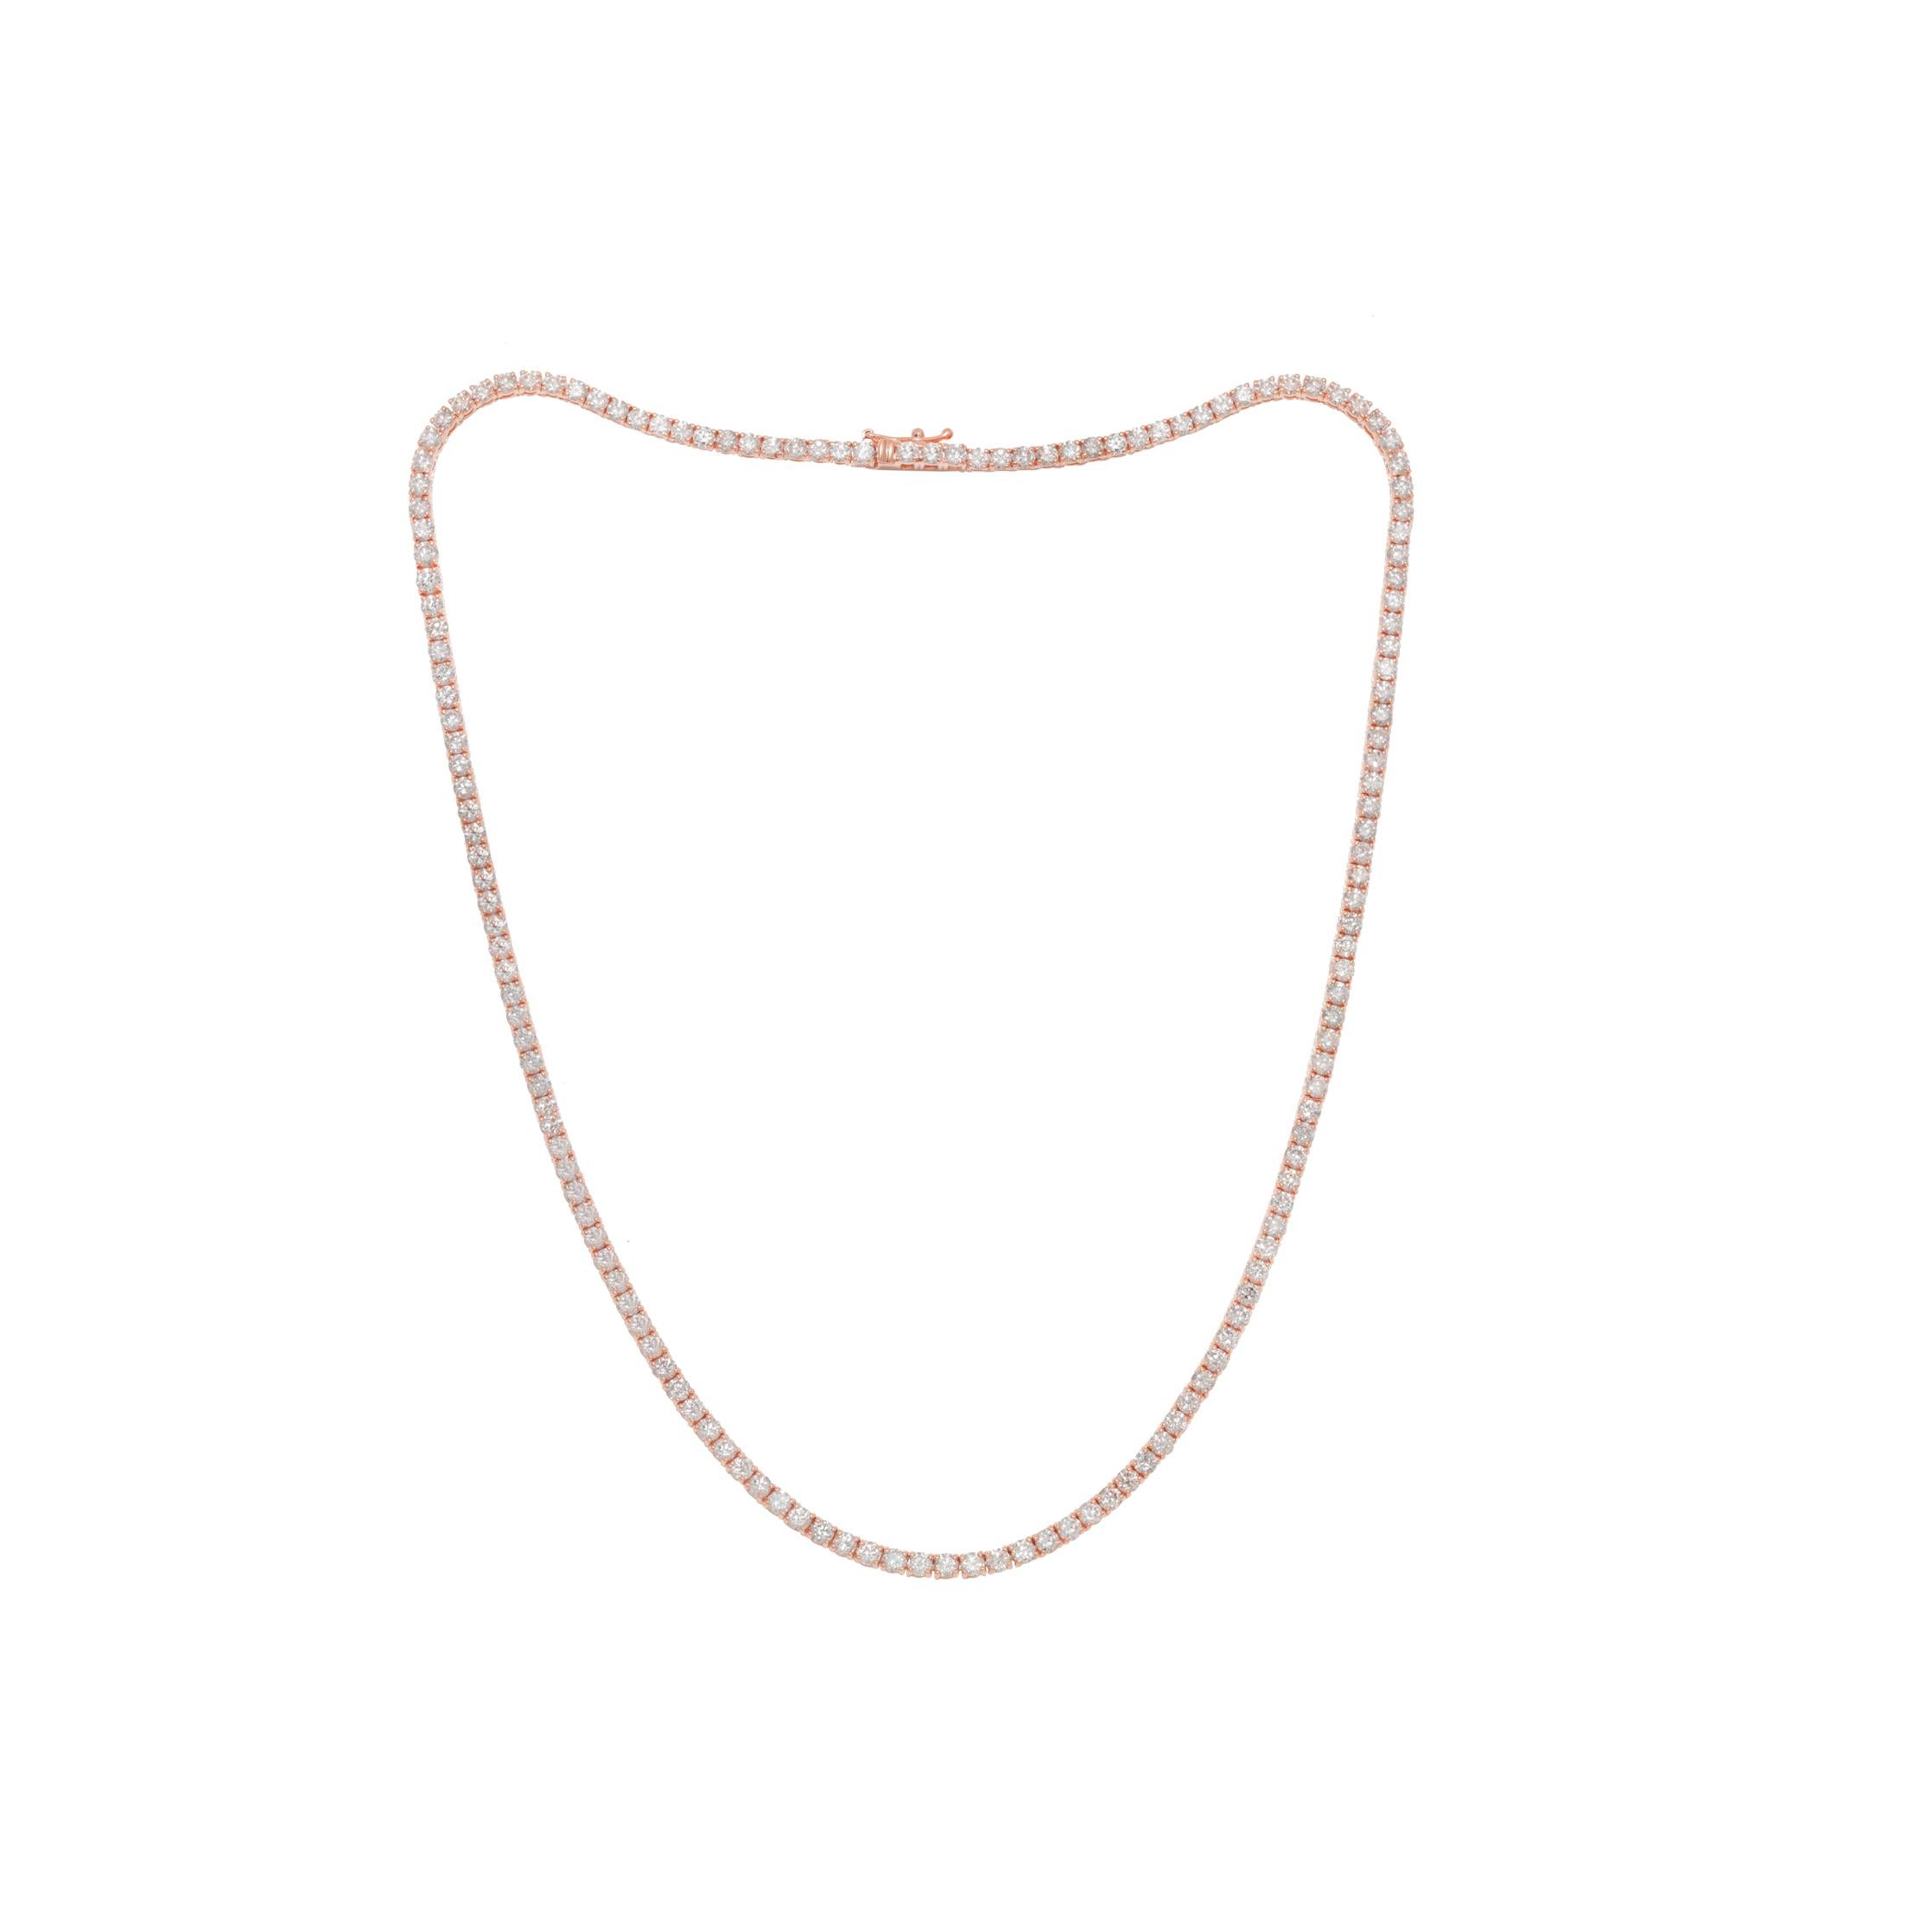 Brilliant Cut Diana M. 14kt rose gold diamond tennis necklace containing 9.70cts   For Sale